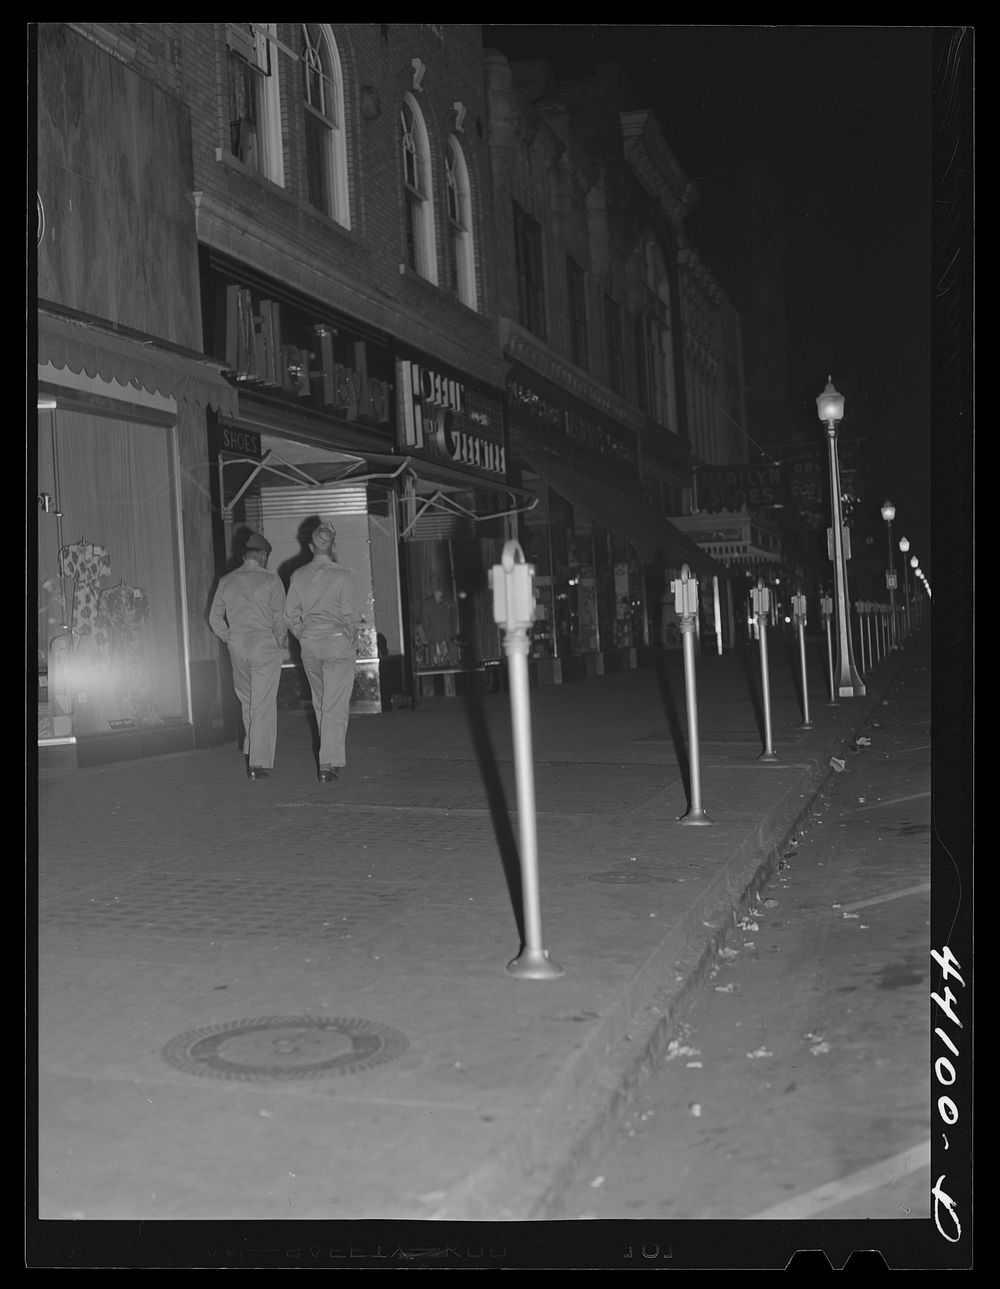 Soldiers from Fort Benning on the main street of Columbus, Georgia, at night. Sourced from the Library of Congress.